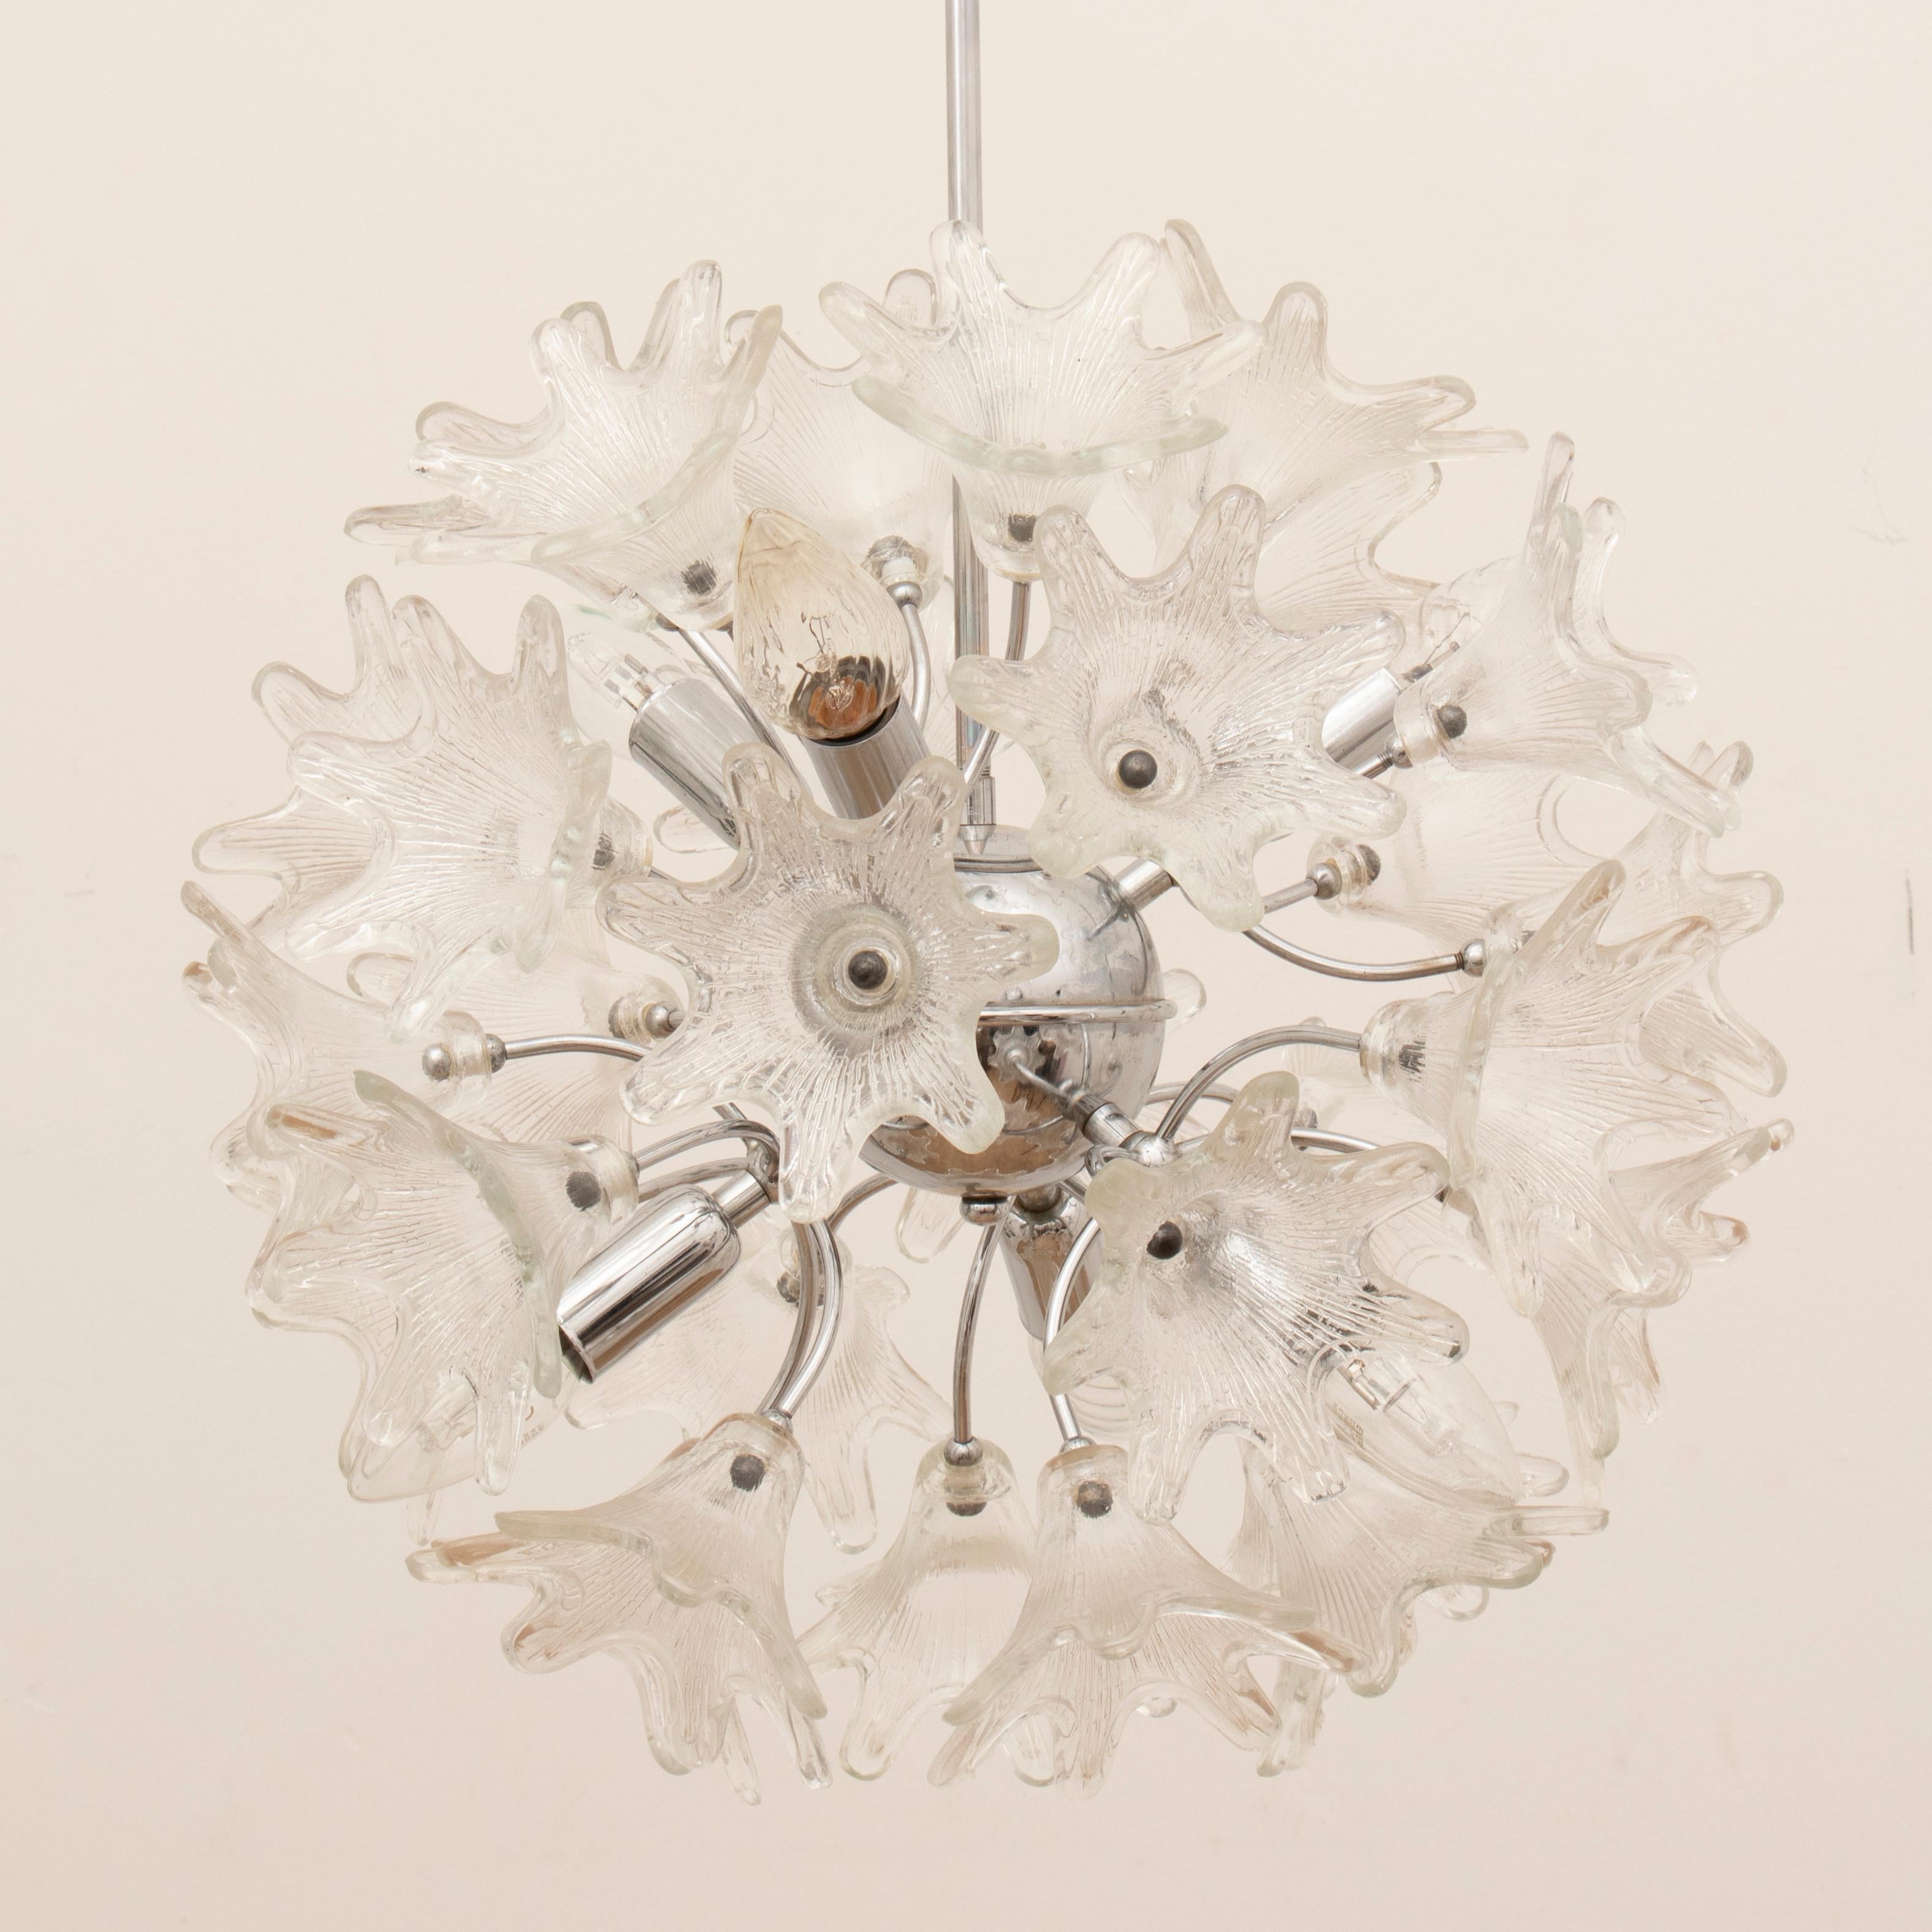 A stunning 1960s Italian Murano glass chandelier designed by Paolo Venini and manufactured by VeArt. Each glass flower is suspended from a chromed sputnik structure with a height adjustable rod and chrome ceiling cup. The light is in very good